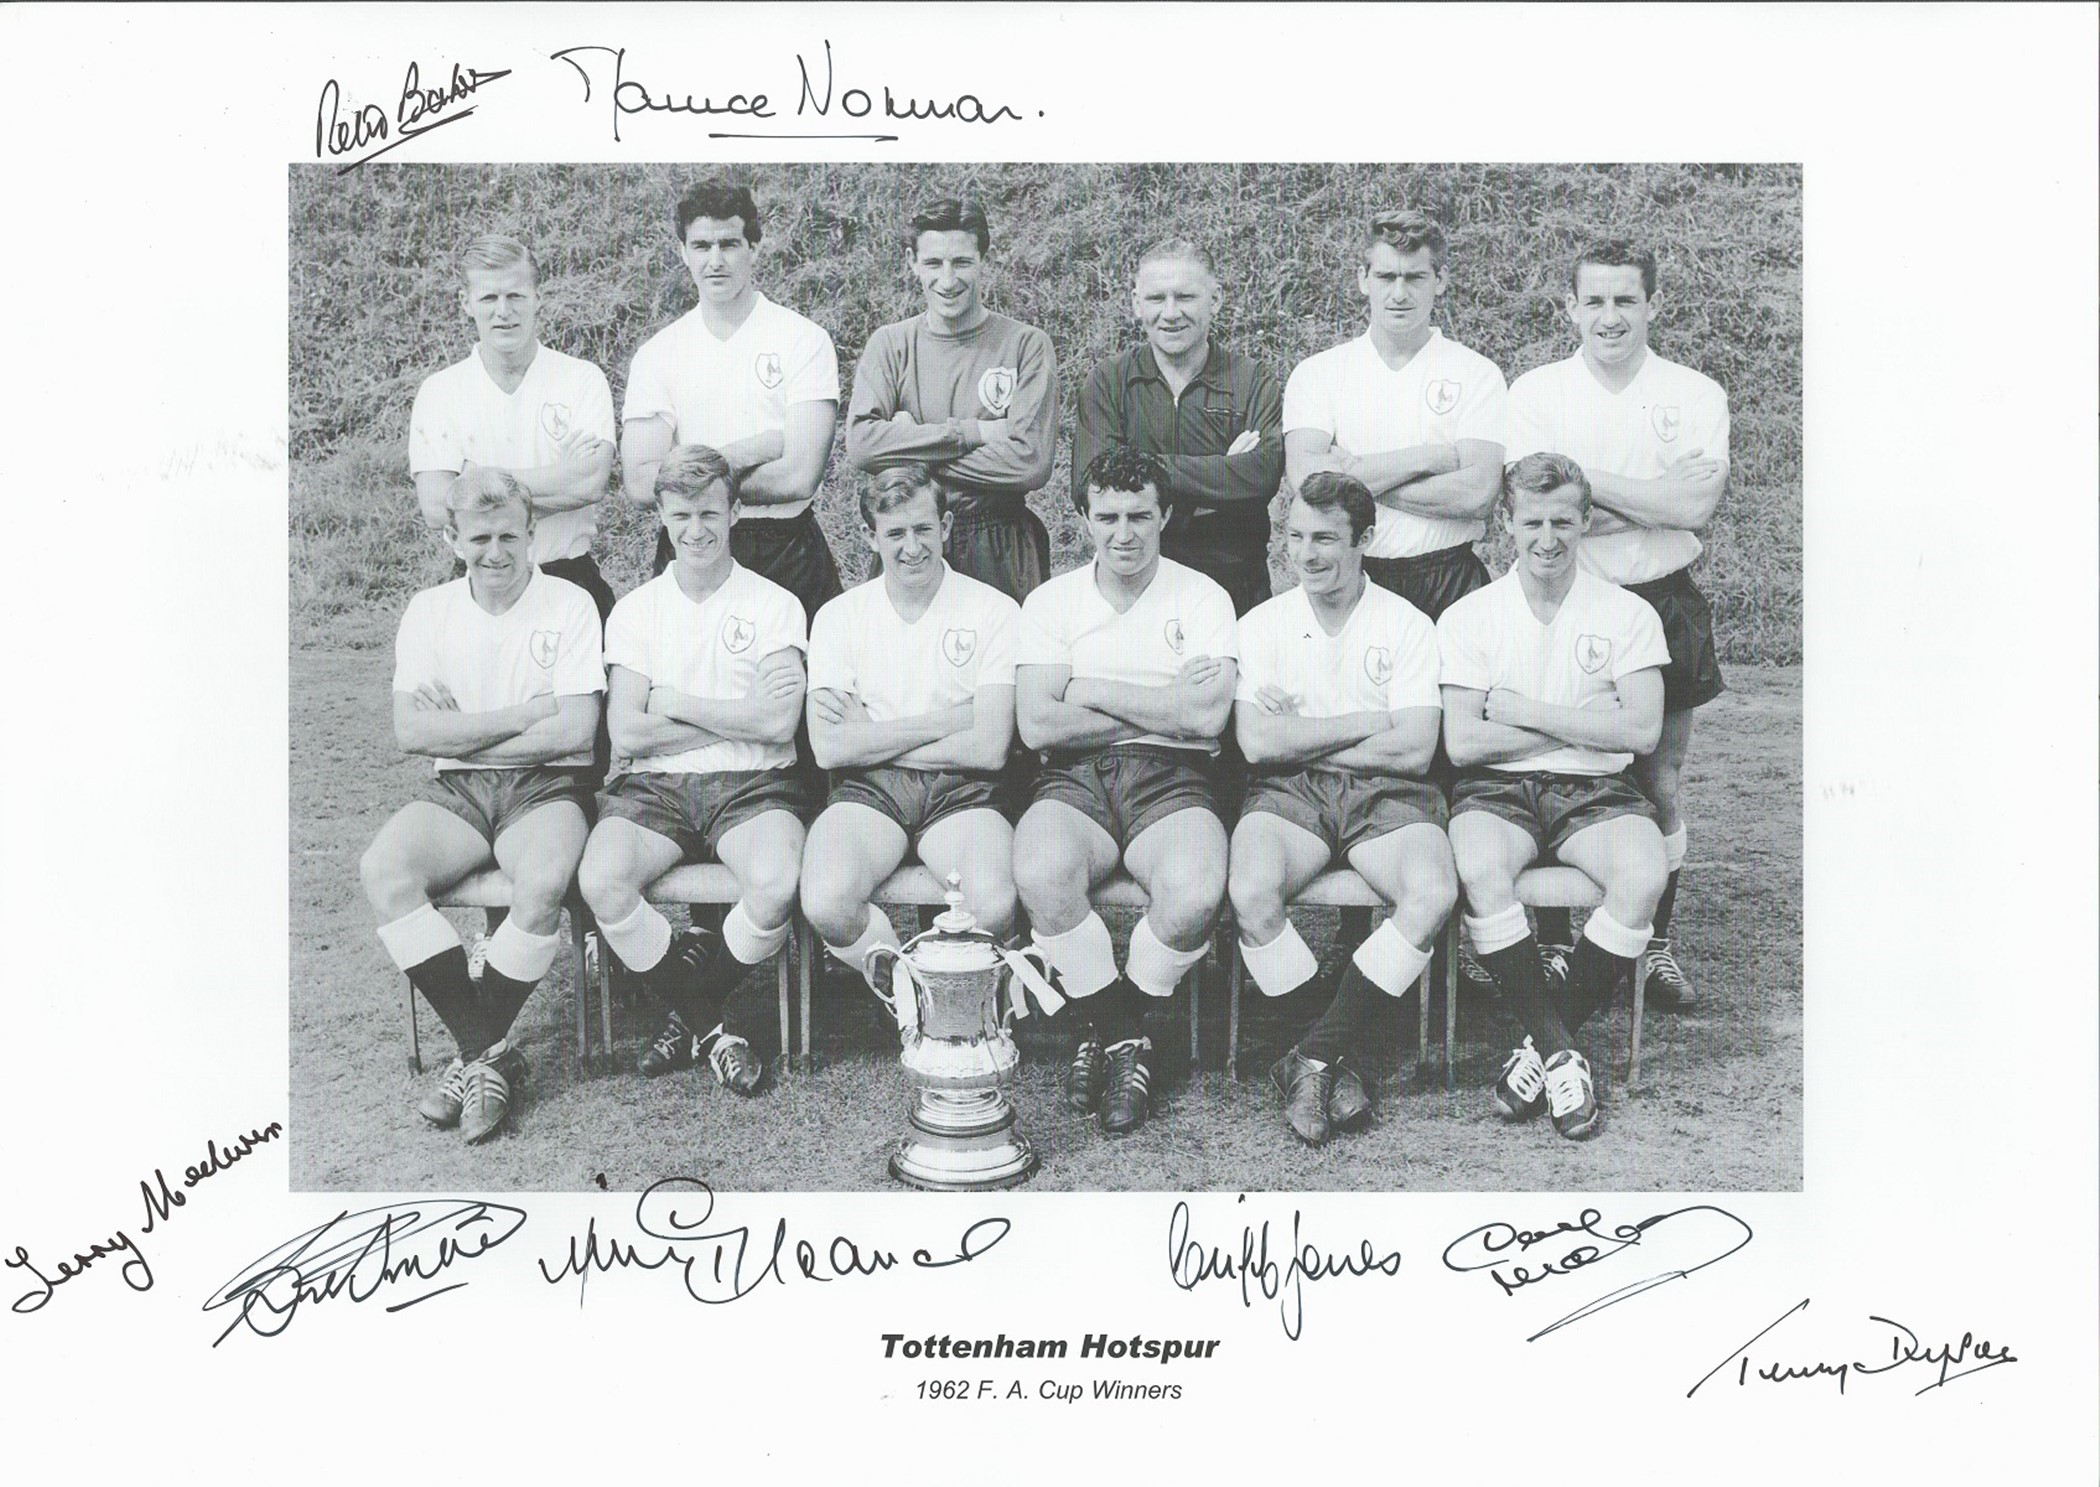 Tottenham Hotspur multi signed 1962 F. A Cup Winners 16x12 black and white photo signatures